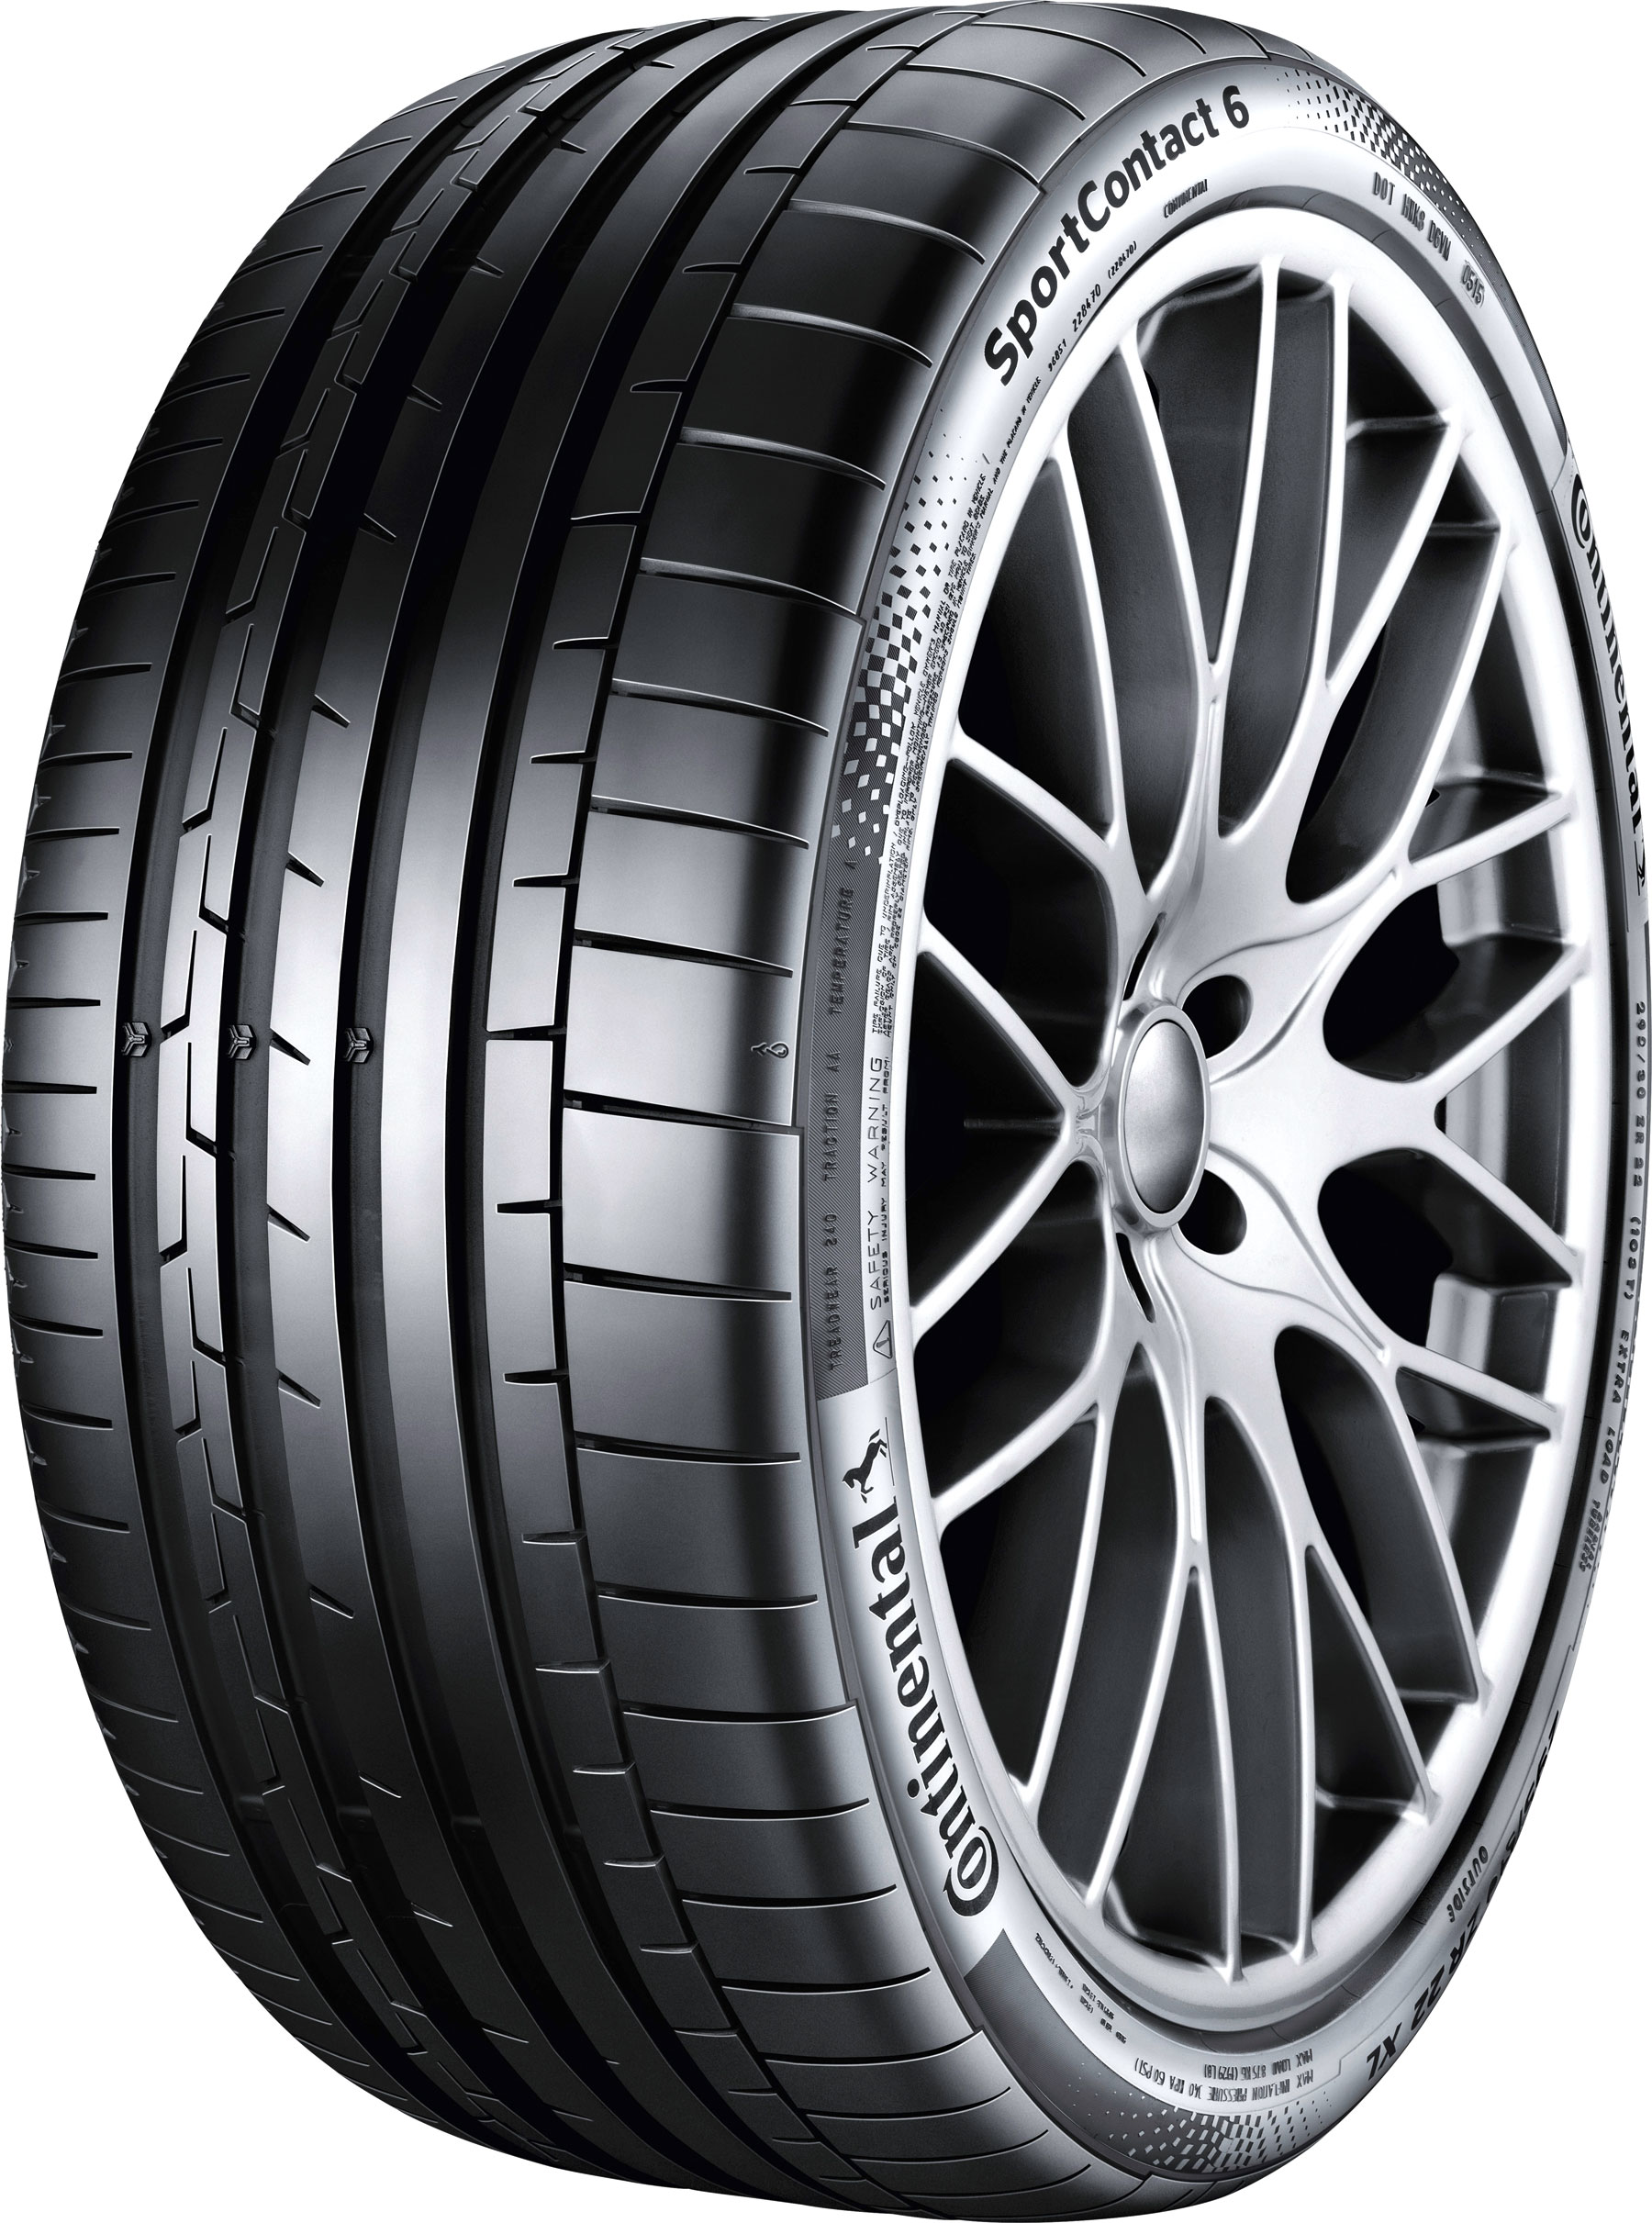 285/40 R22 Continental SportContact 6 FR MO1 110 Y